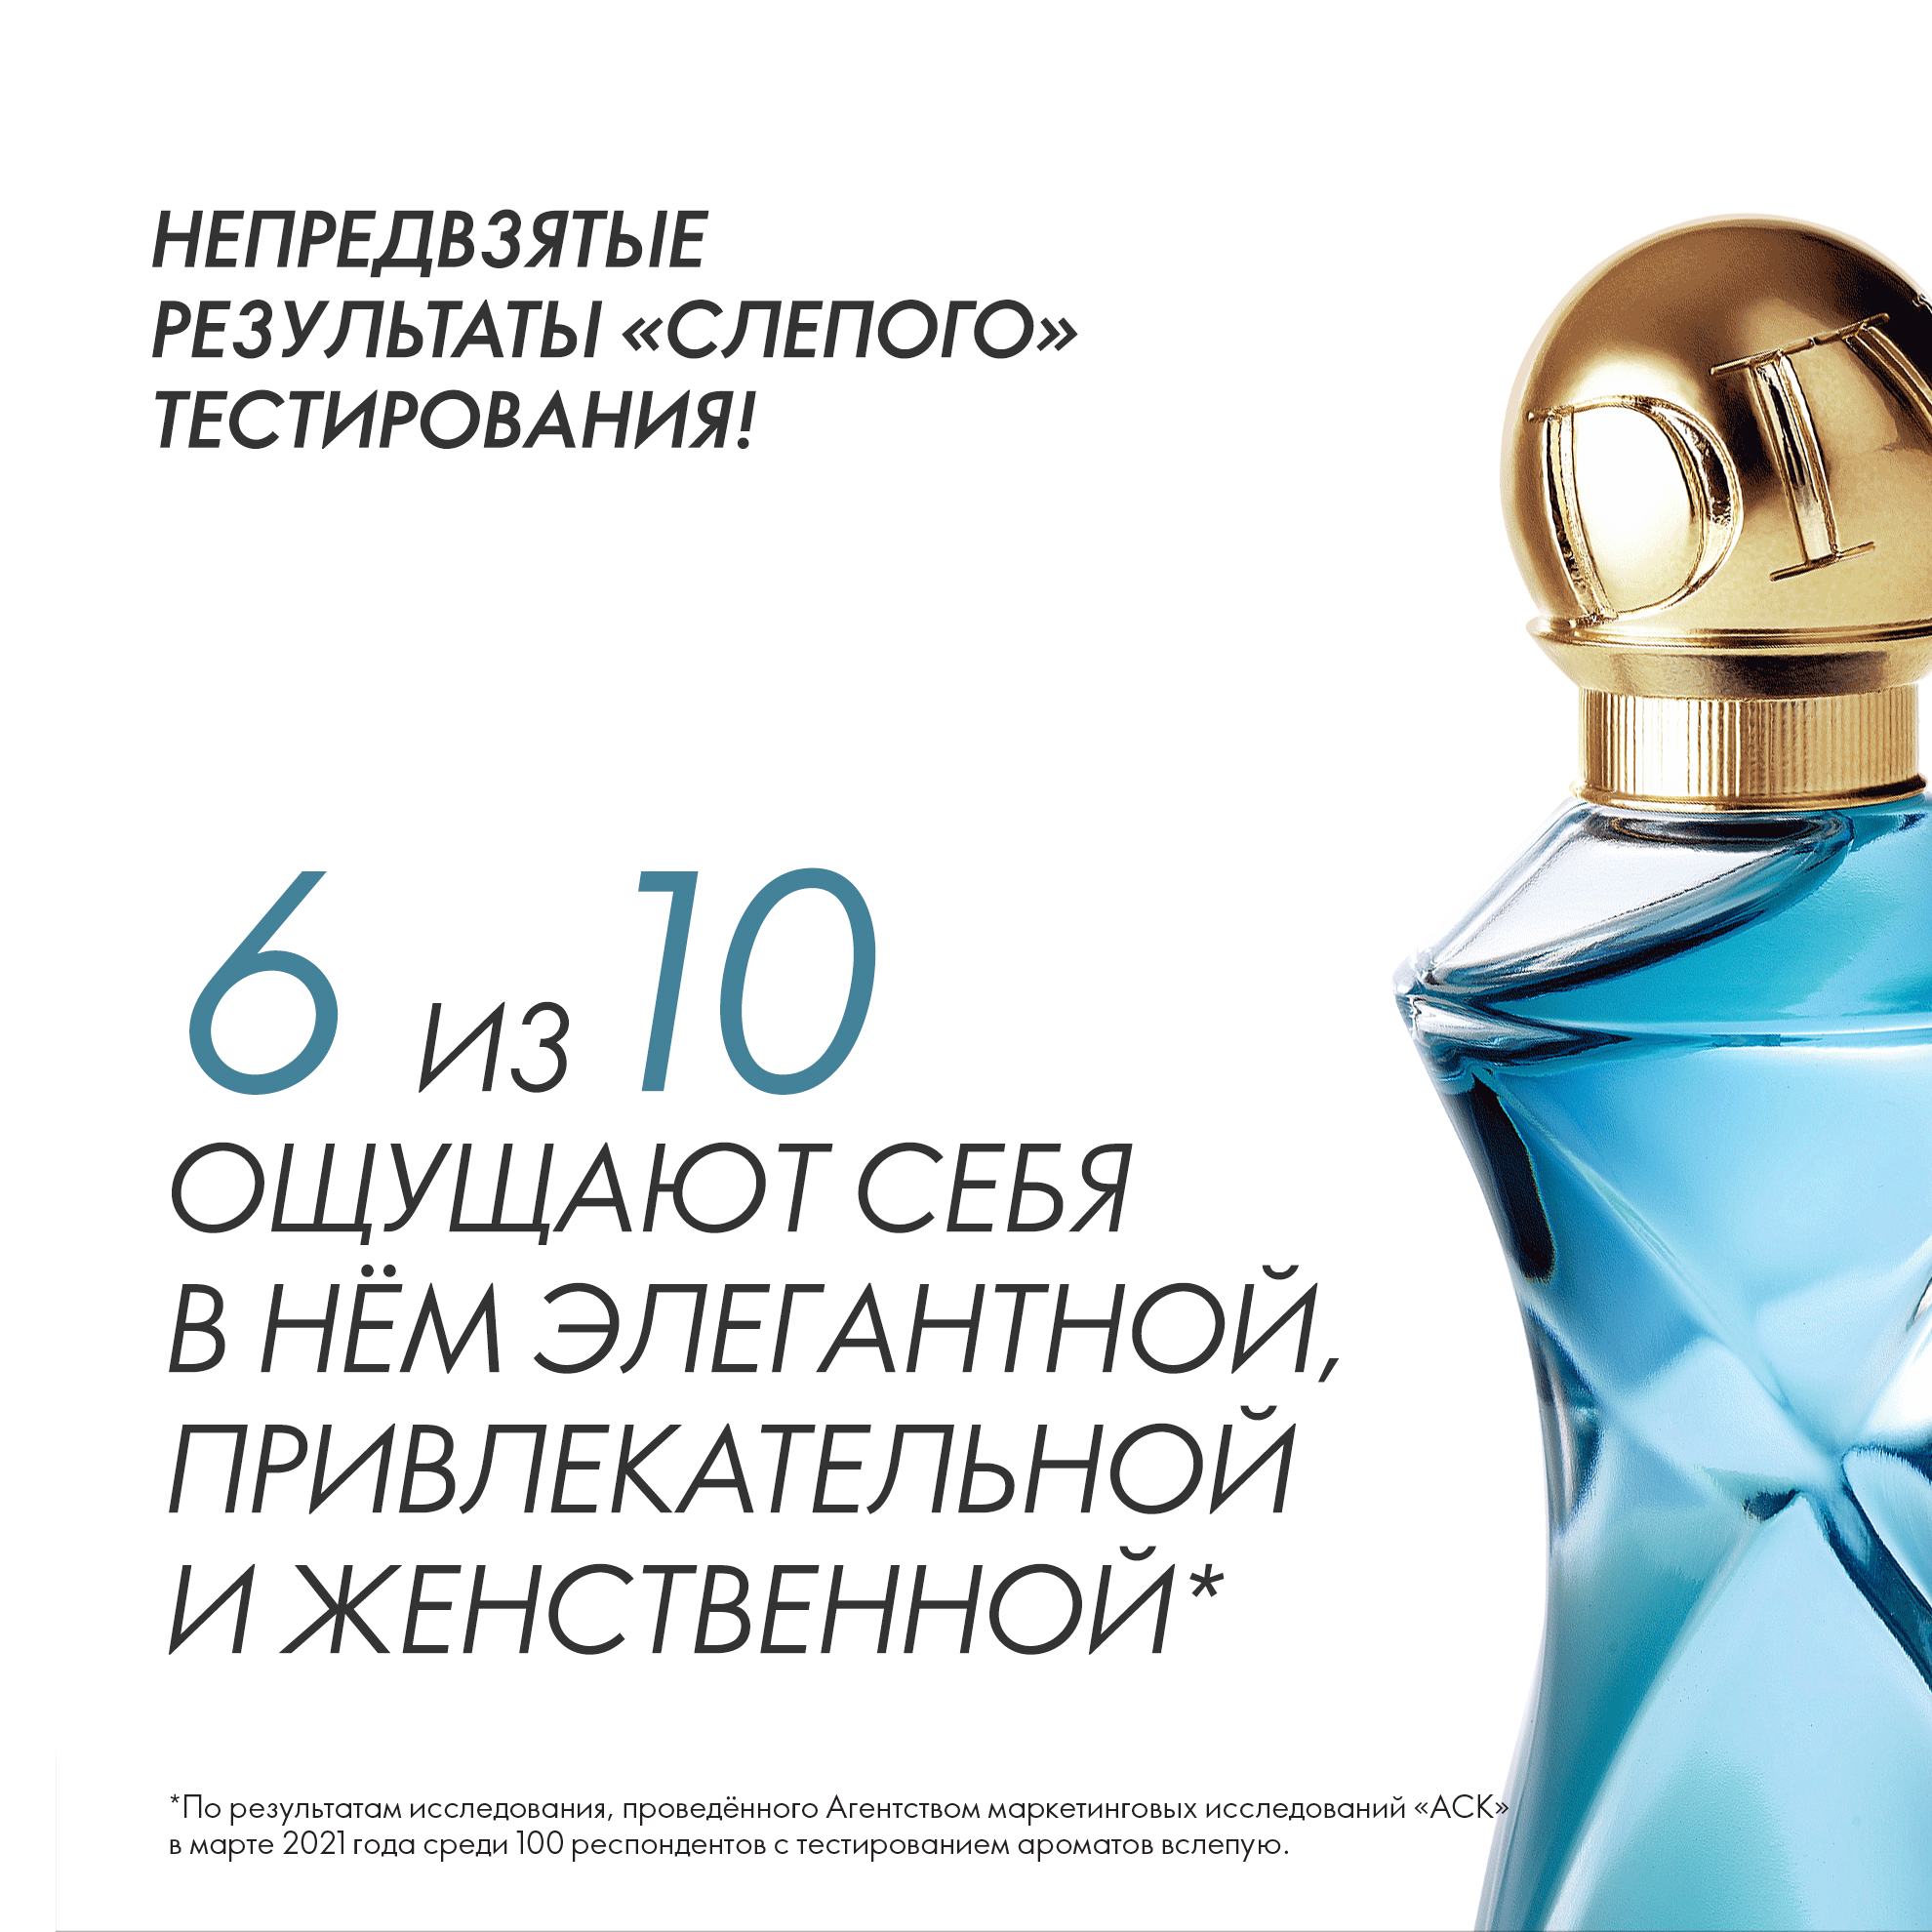 https://media-cdn.oriflame.com/productImage?externalMediaId=product-management-media%2fProducts%2f38497%2fRU%2f38497_6.png&id=15414332&version=1